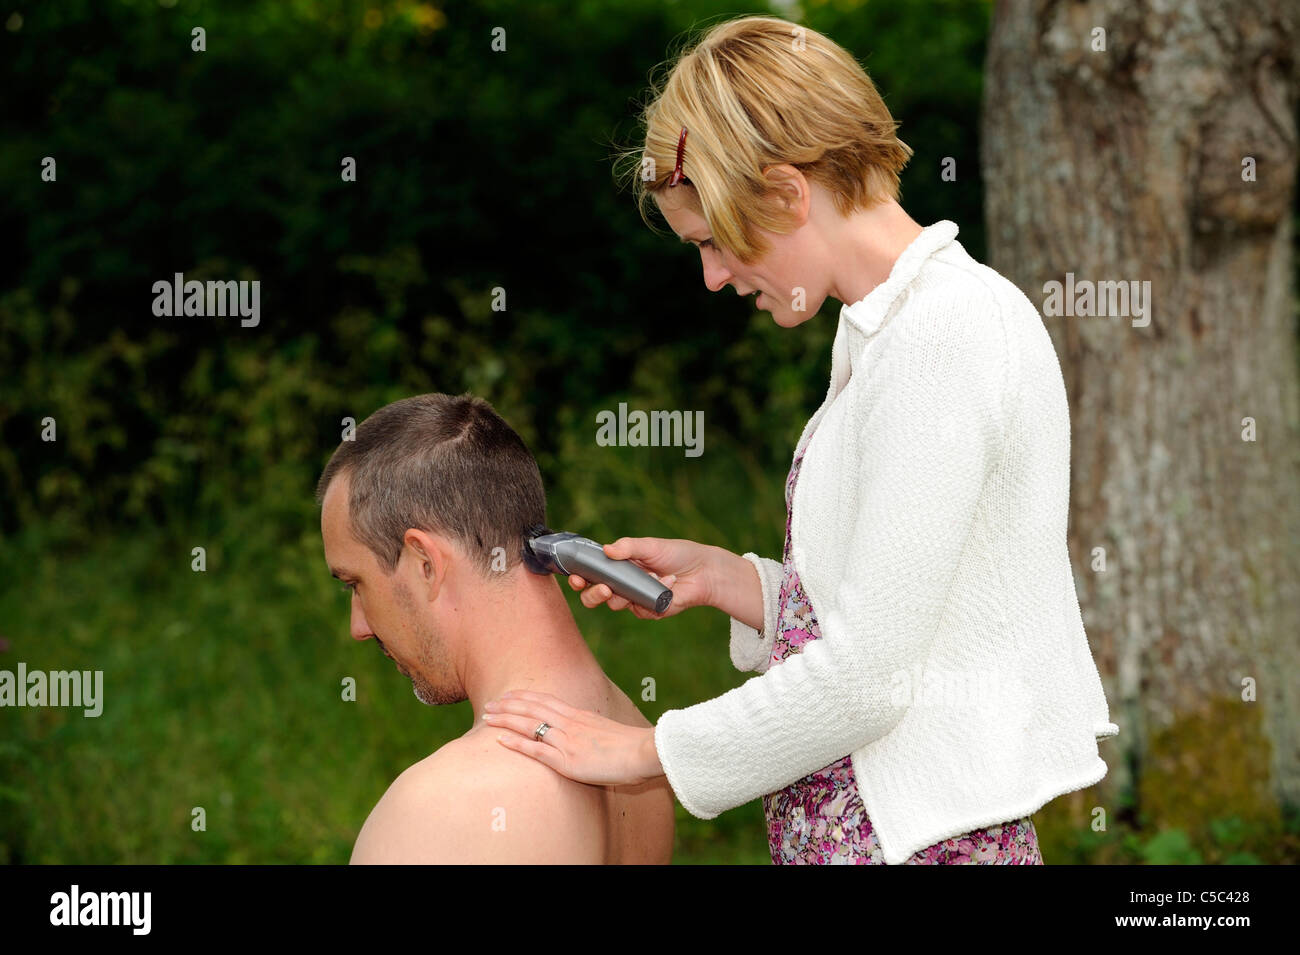 cutting a mans hair with clippers